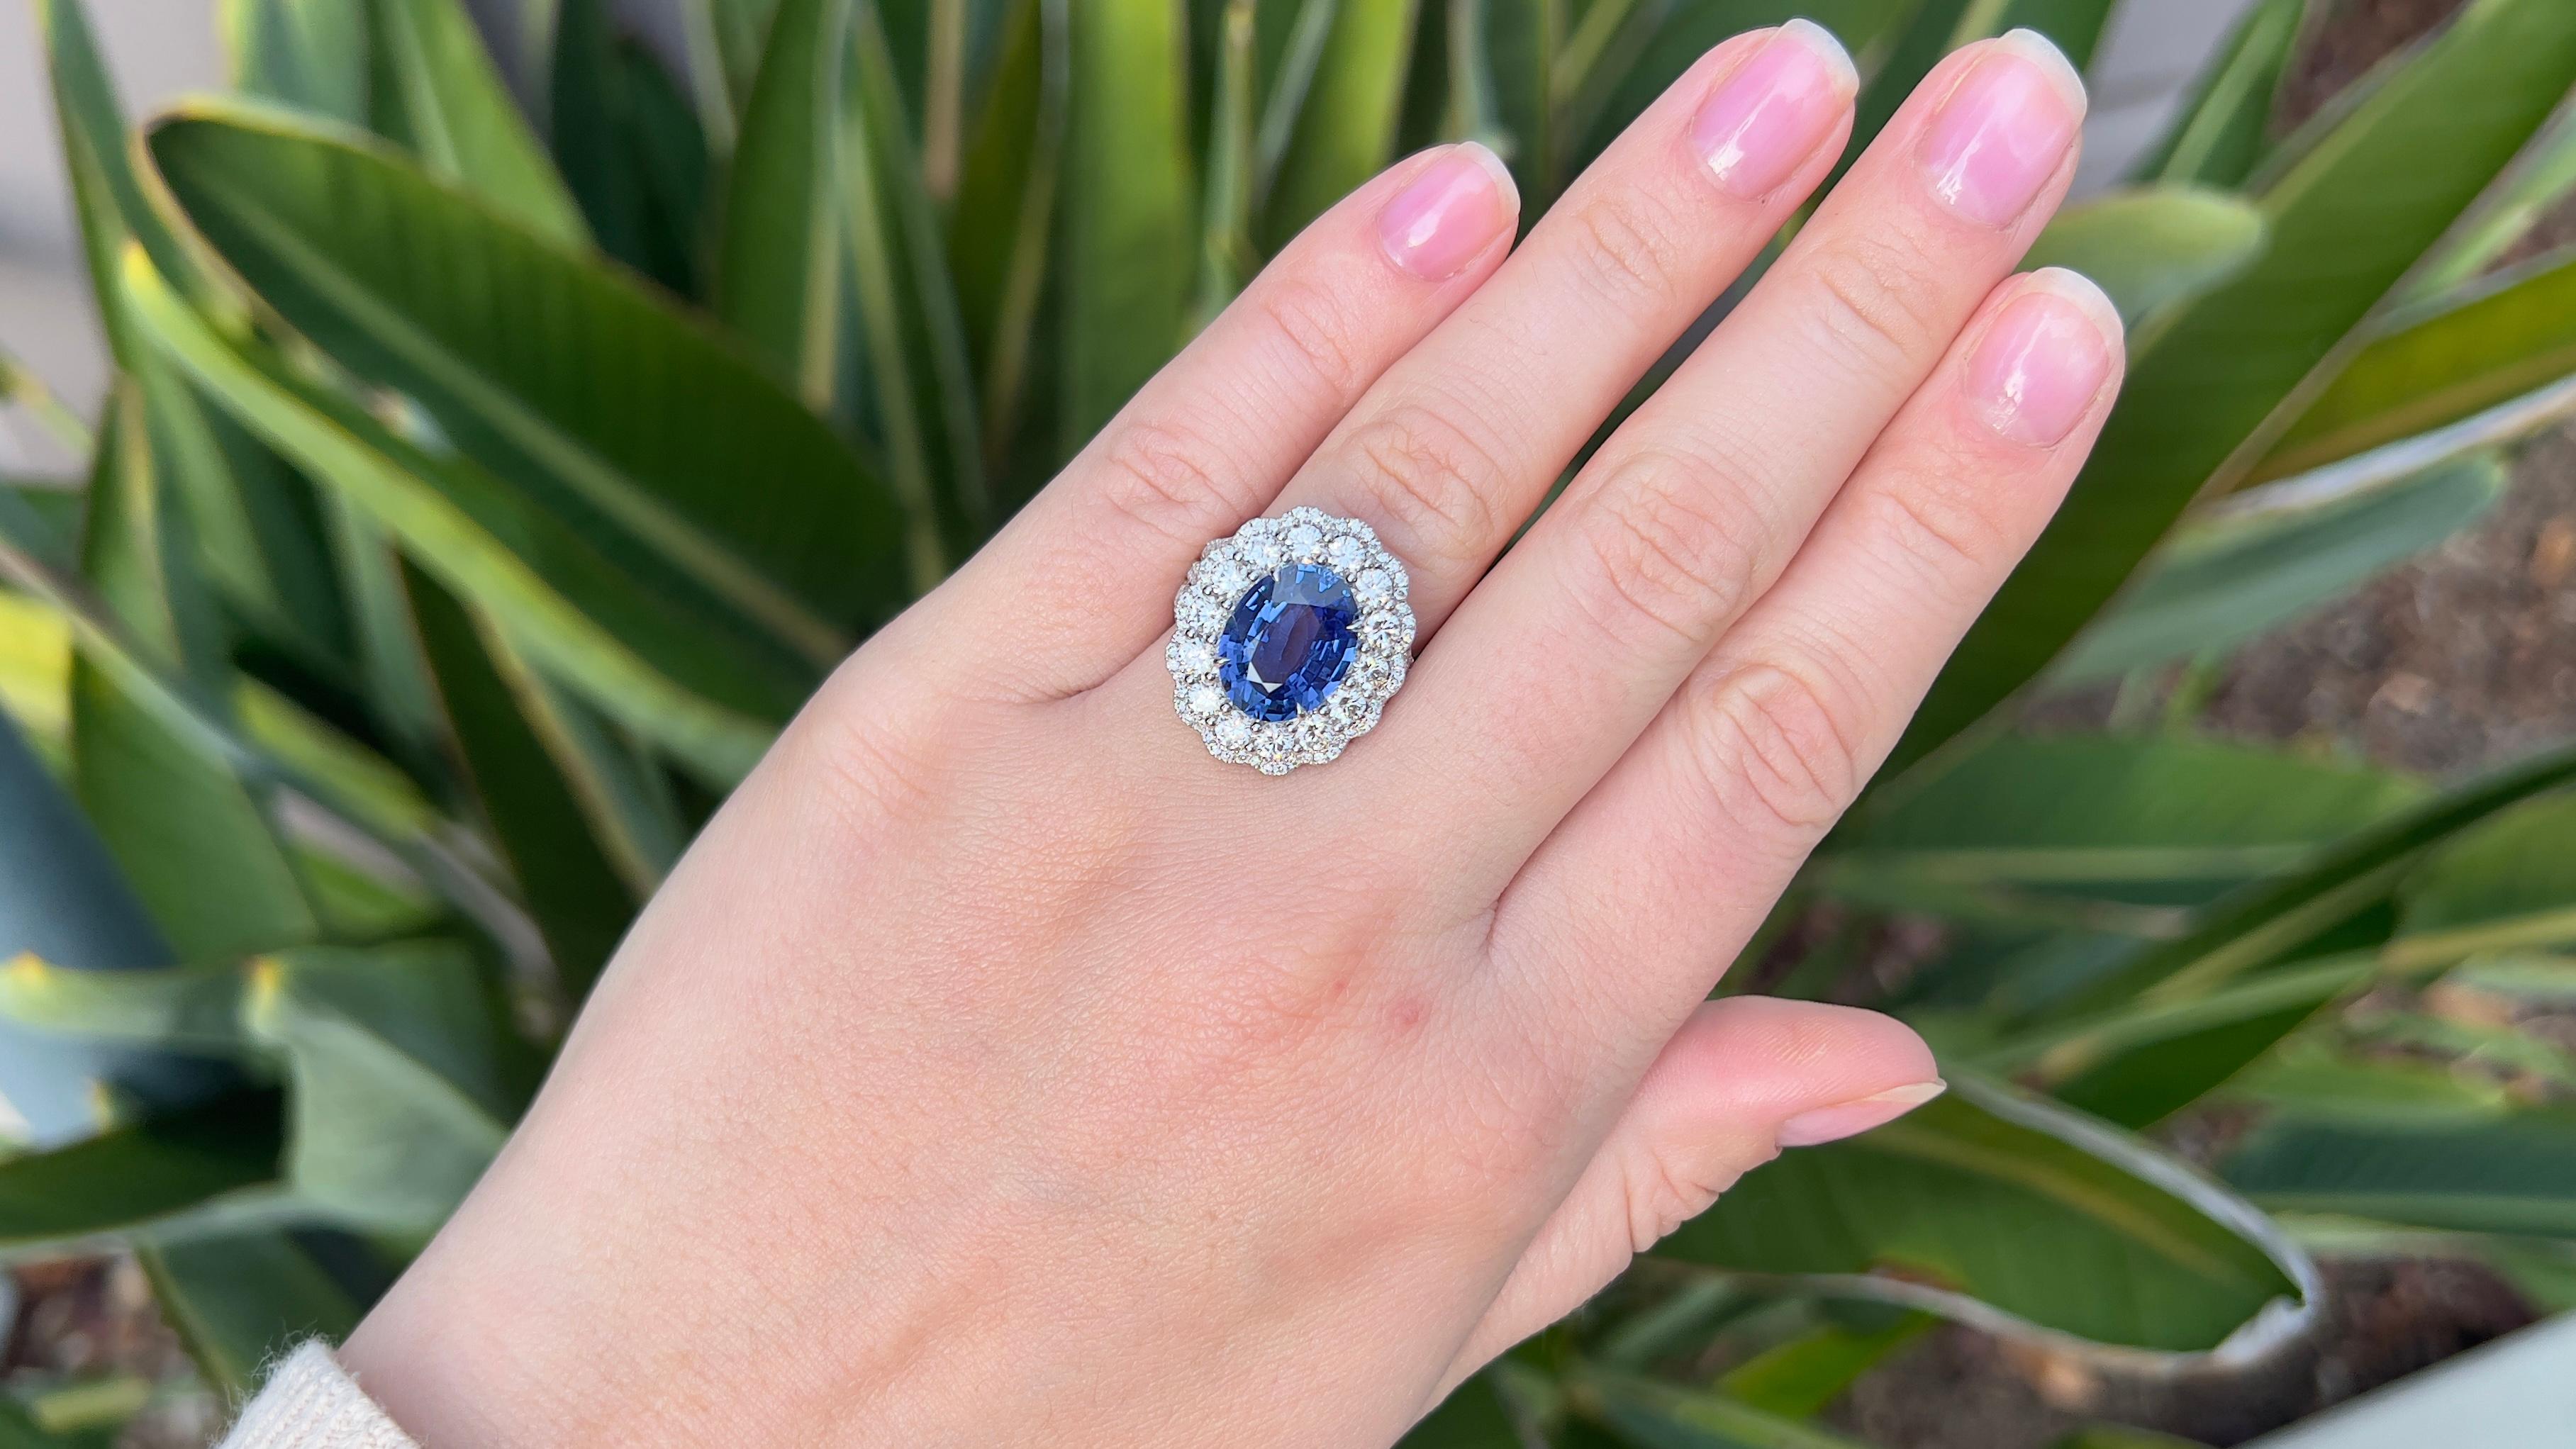 Sapphire = 5.83 Carat 
Cut: Oval
112 Round Diamonds = 2.45 Carats
( Color: F, Clarity: VS )
Metal: 18K Gold
Ring Size: 6.25* US
*It can be resized complimentary